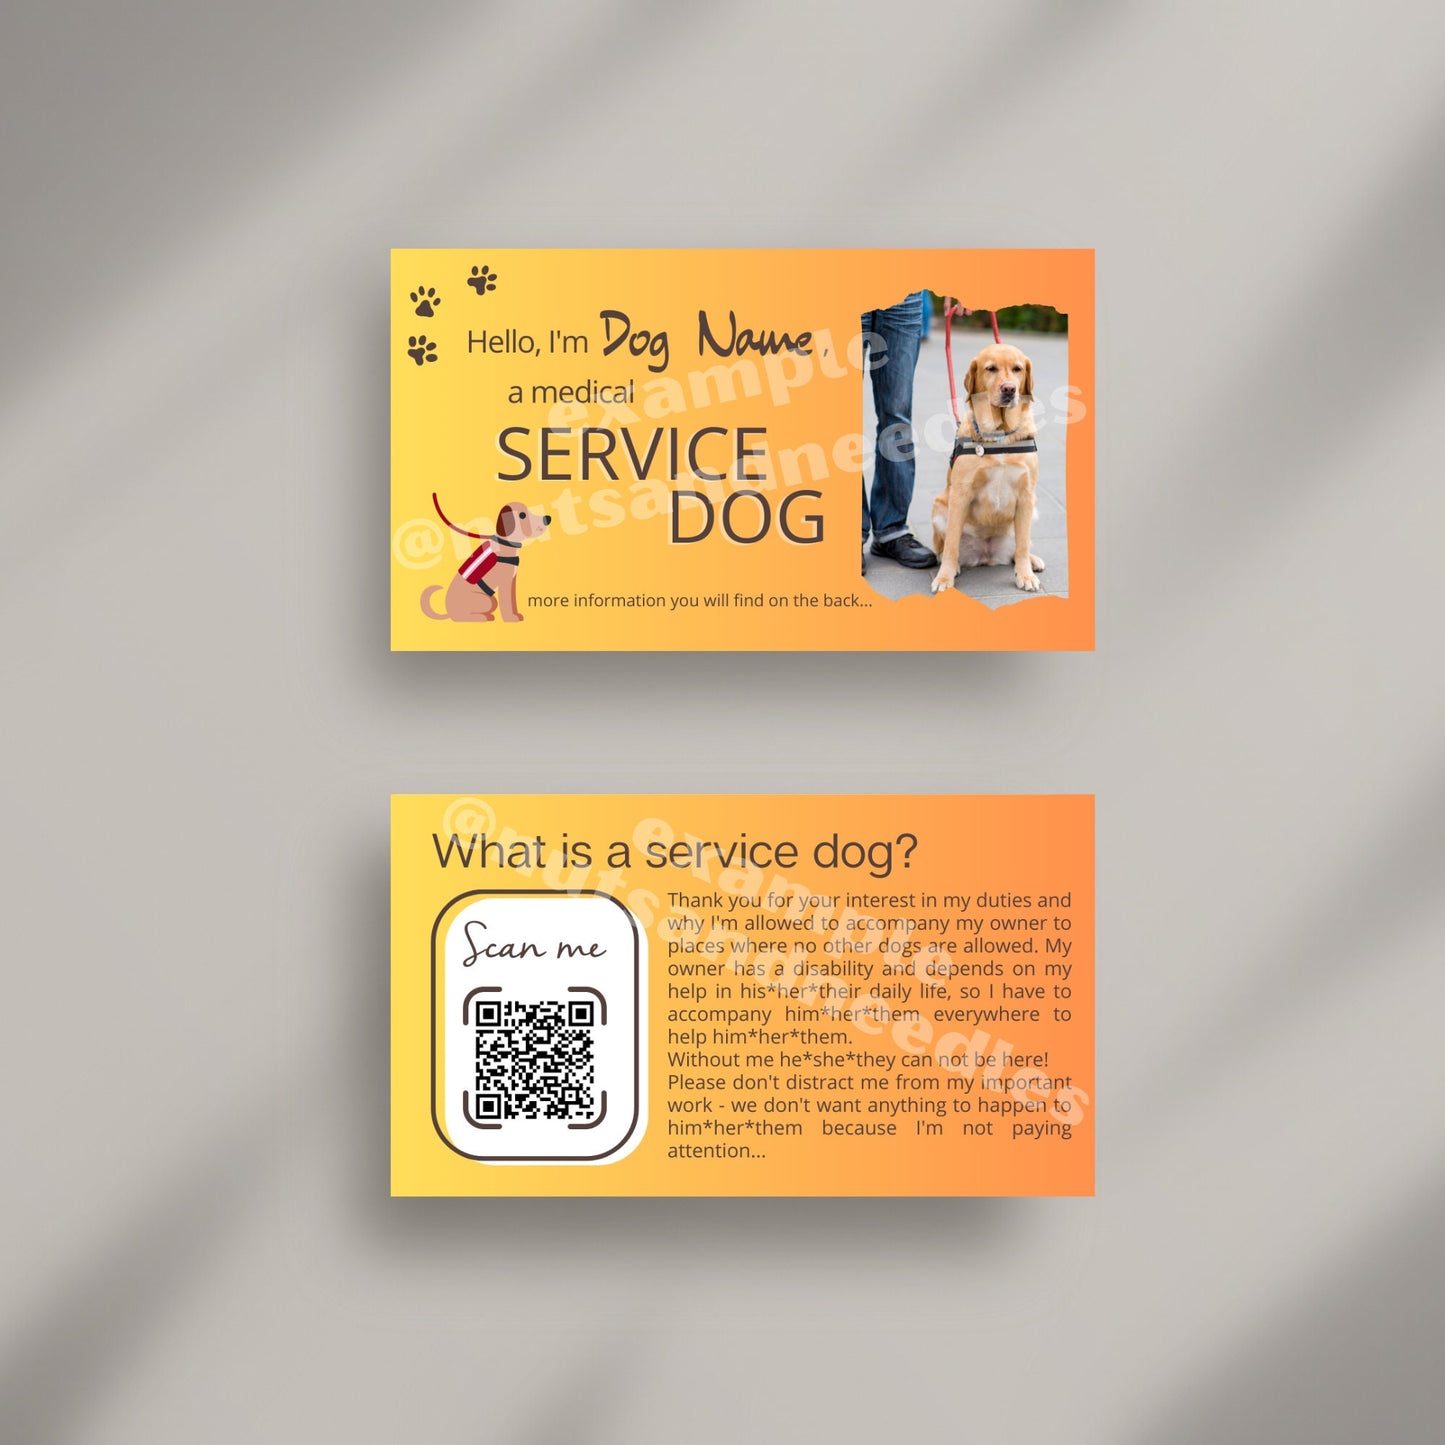 personalized Service Dog Business Card, smart way to sensitize people asking about your service dog, custom information about Service Dogs